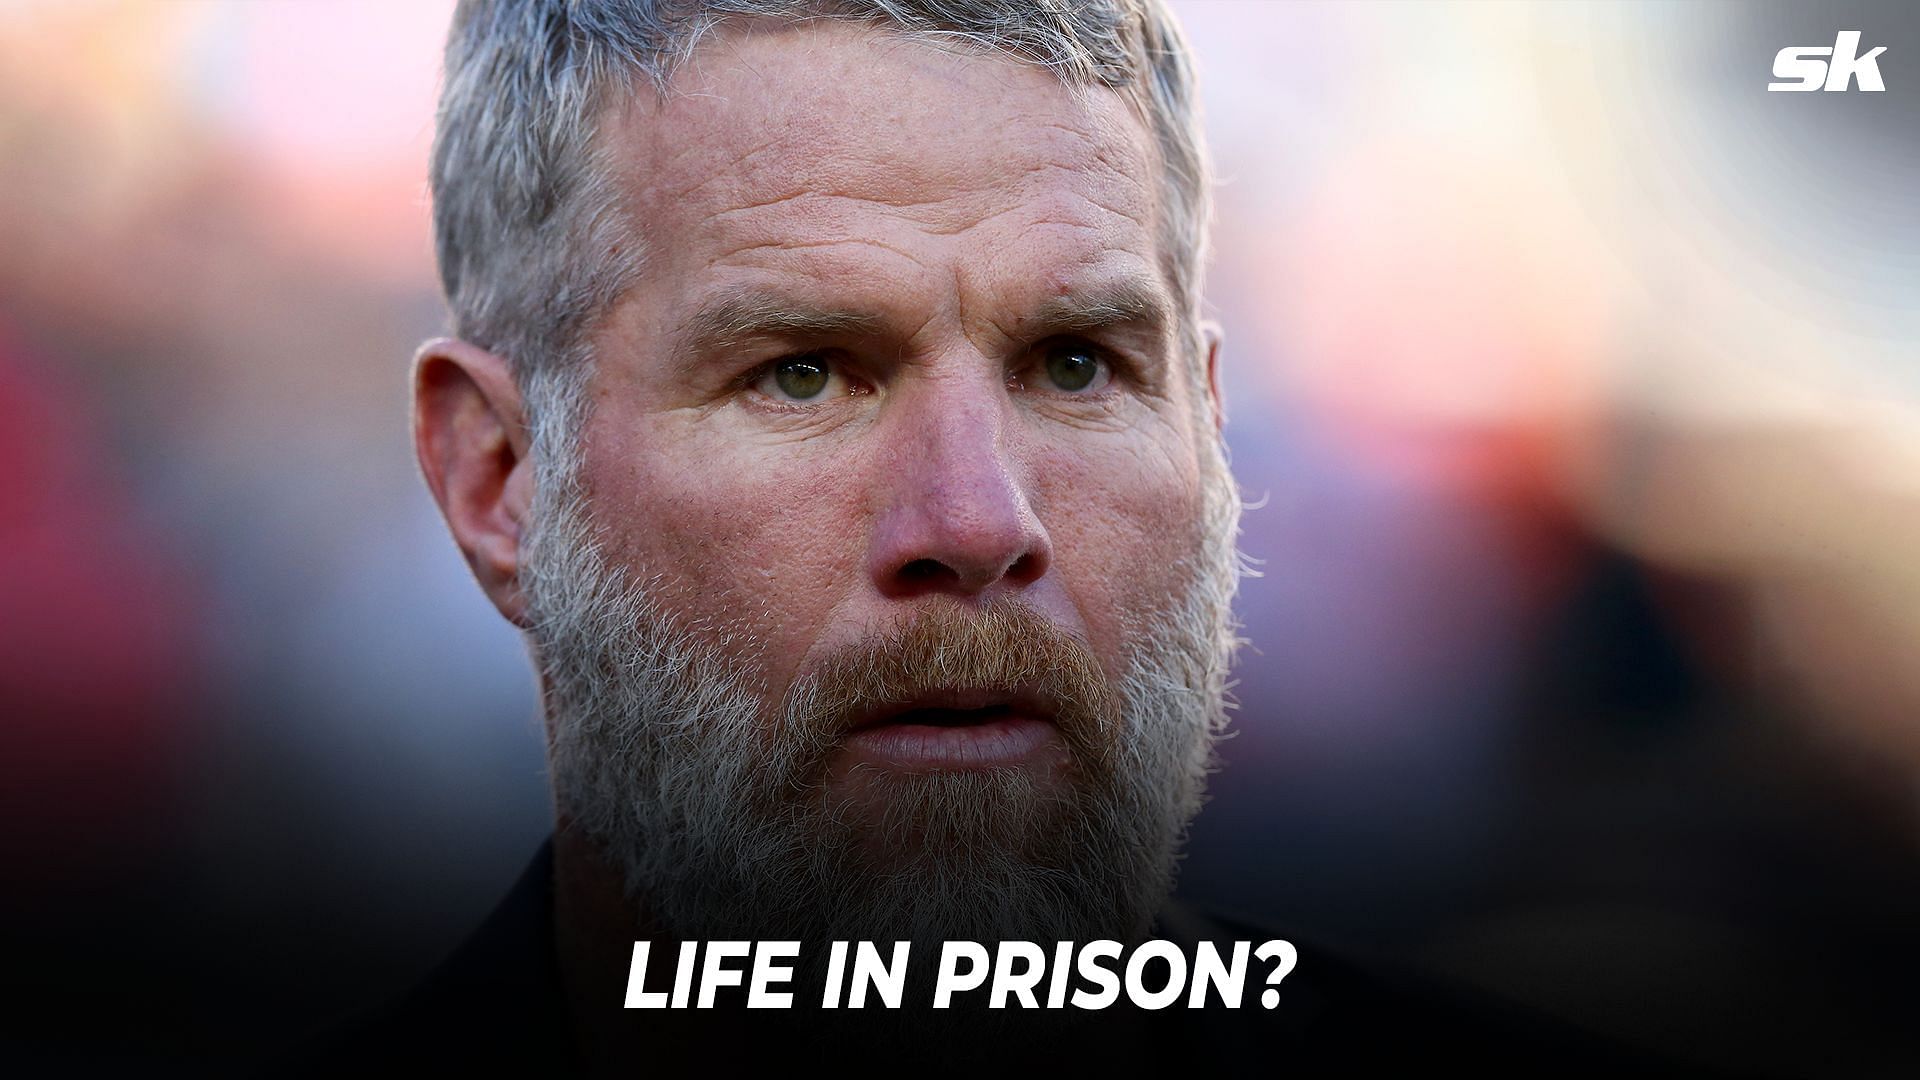 New court filing could be the final nail in the coffin for Brett Favre